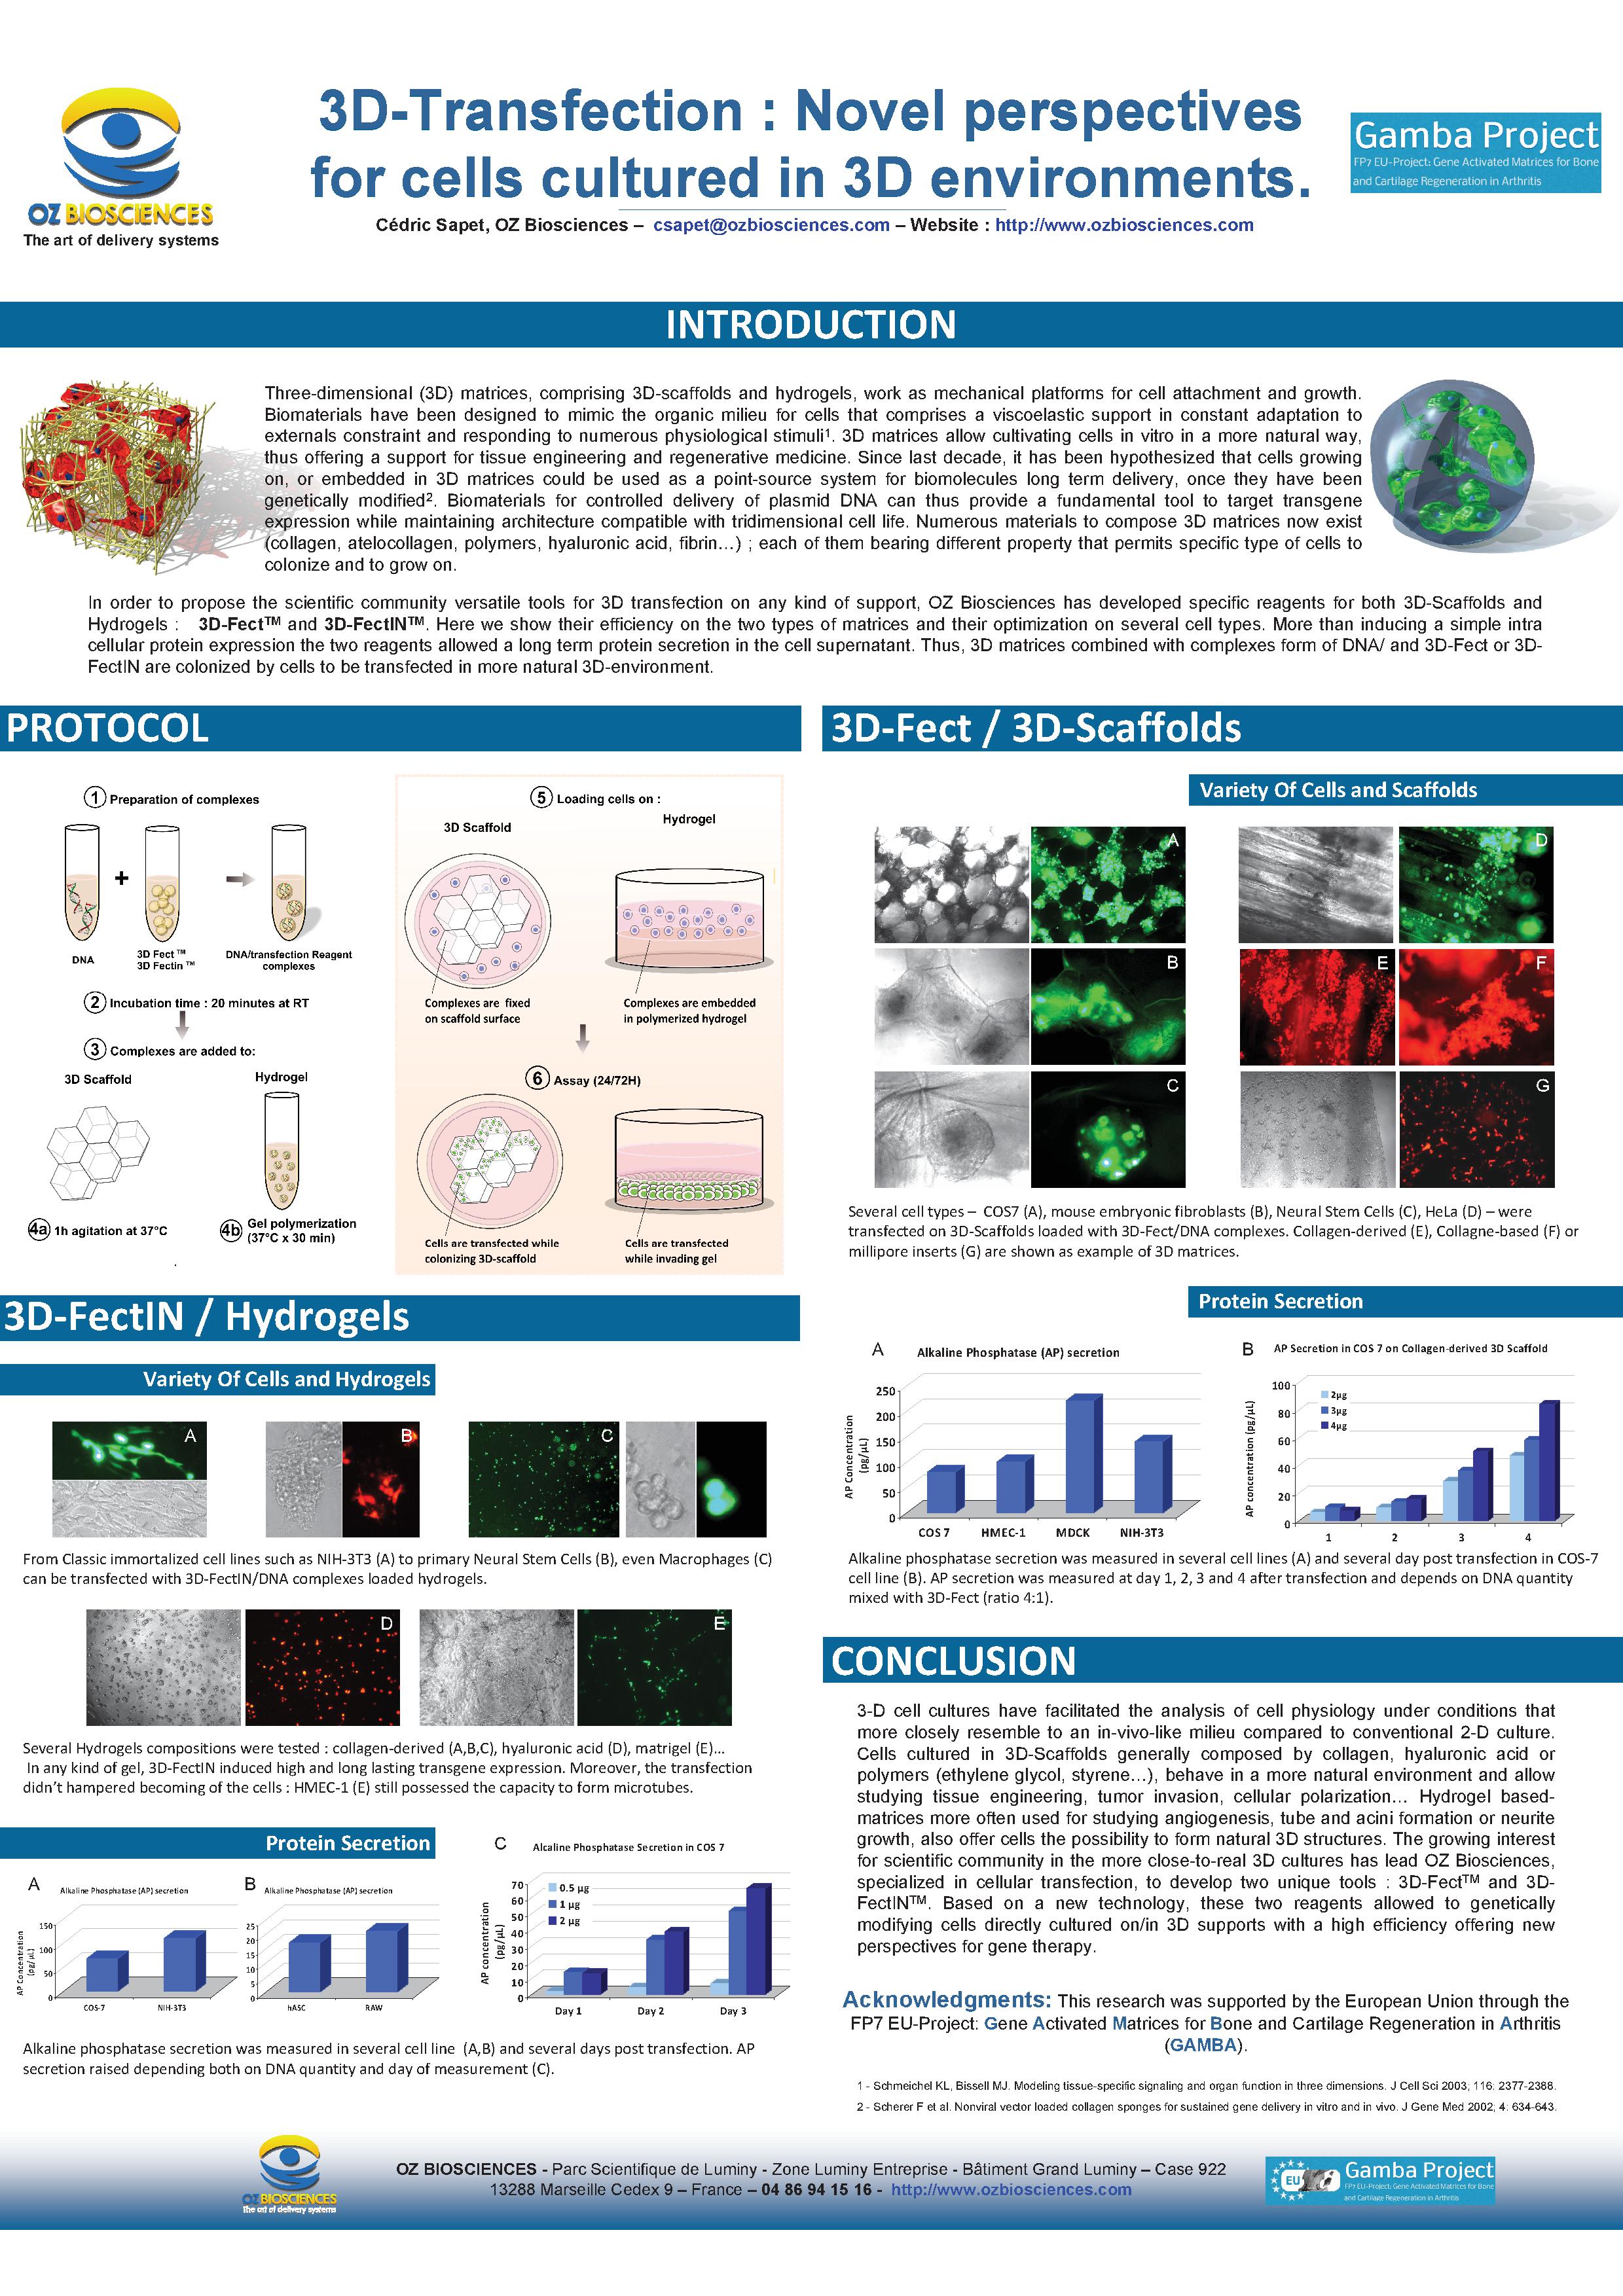 3D-Transfection: Novel perspectives for cells cultured in 3D environments